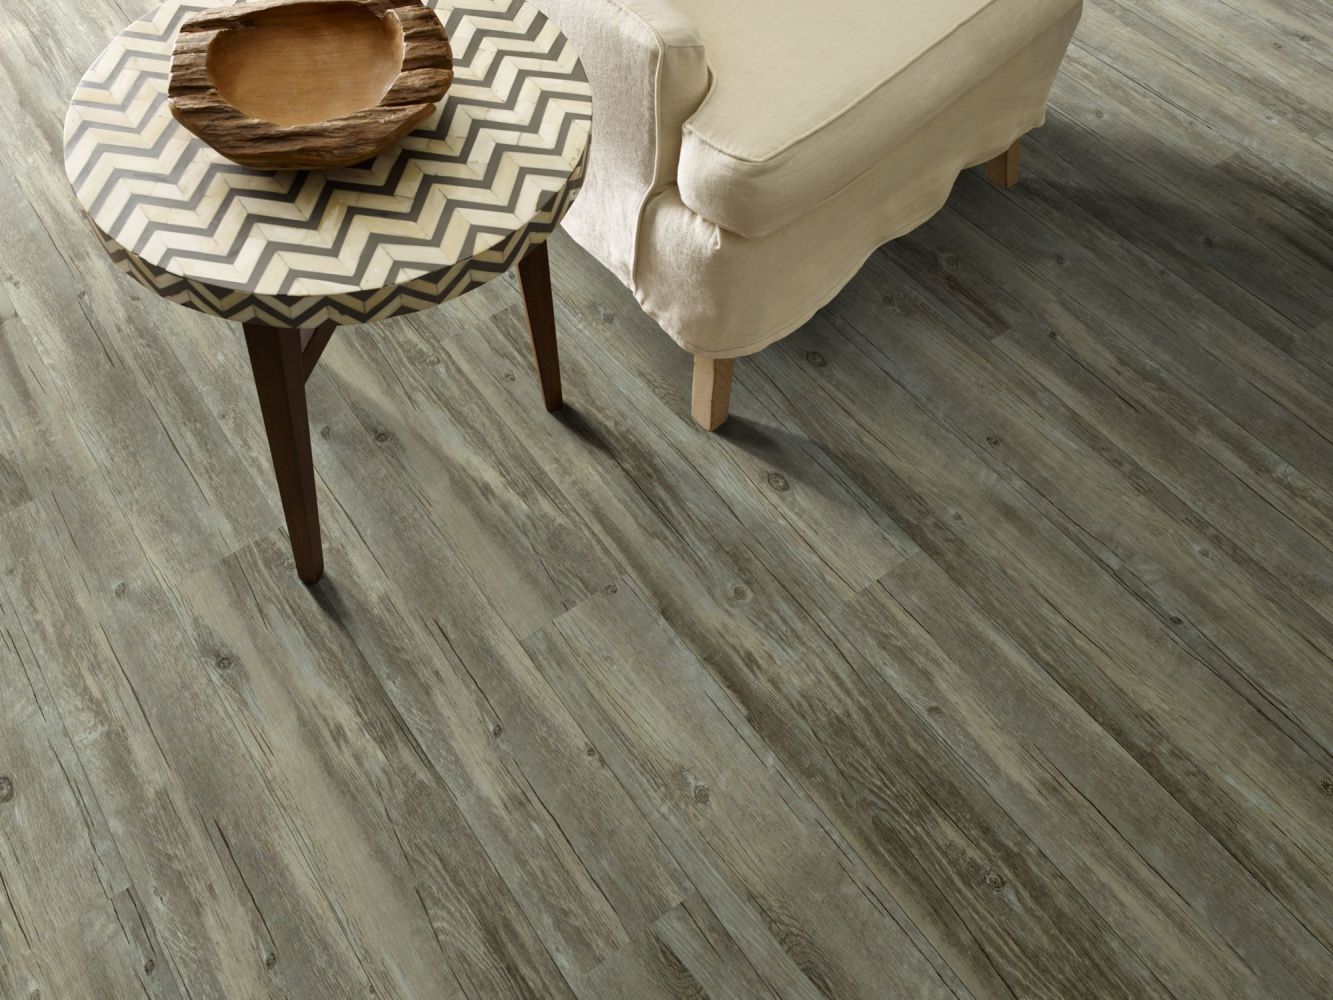 Shaw Floors Dr Horton Cosmo Plank Roma 00507_DR001